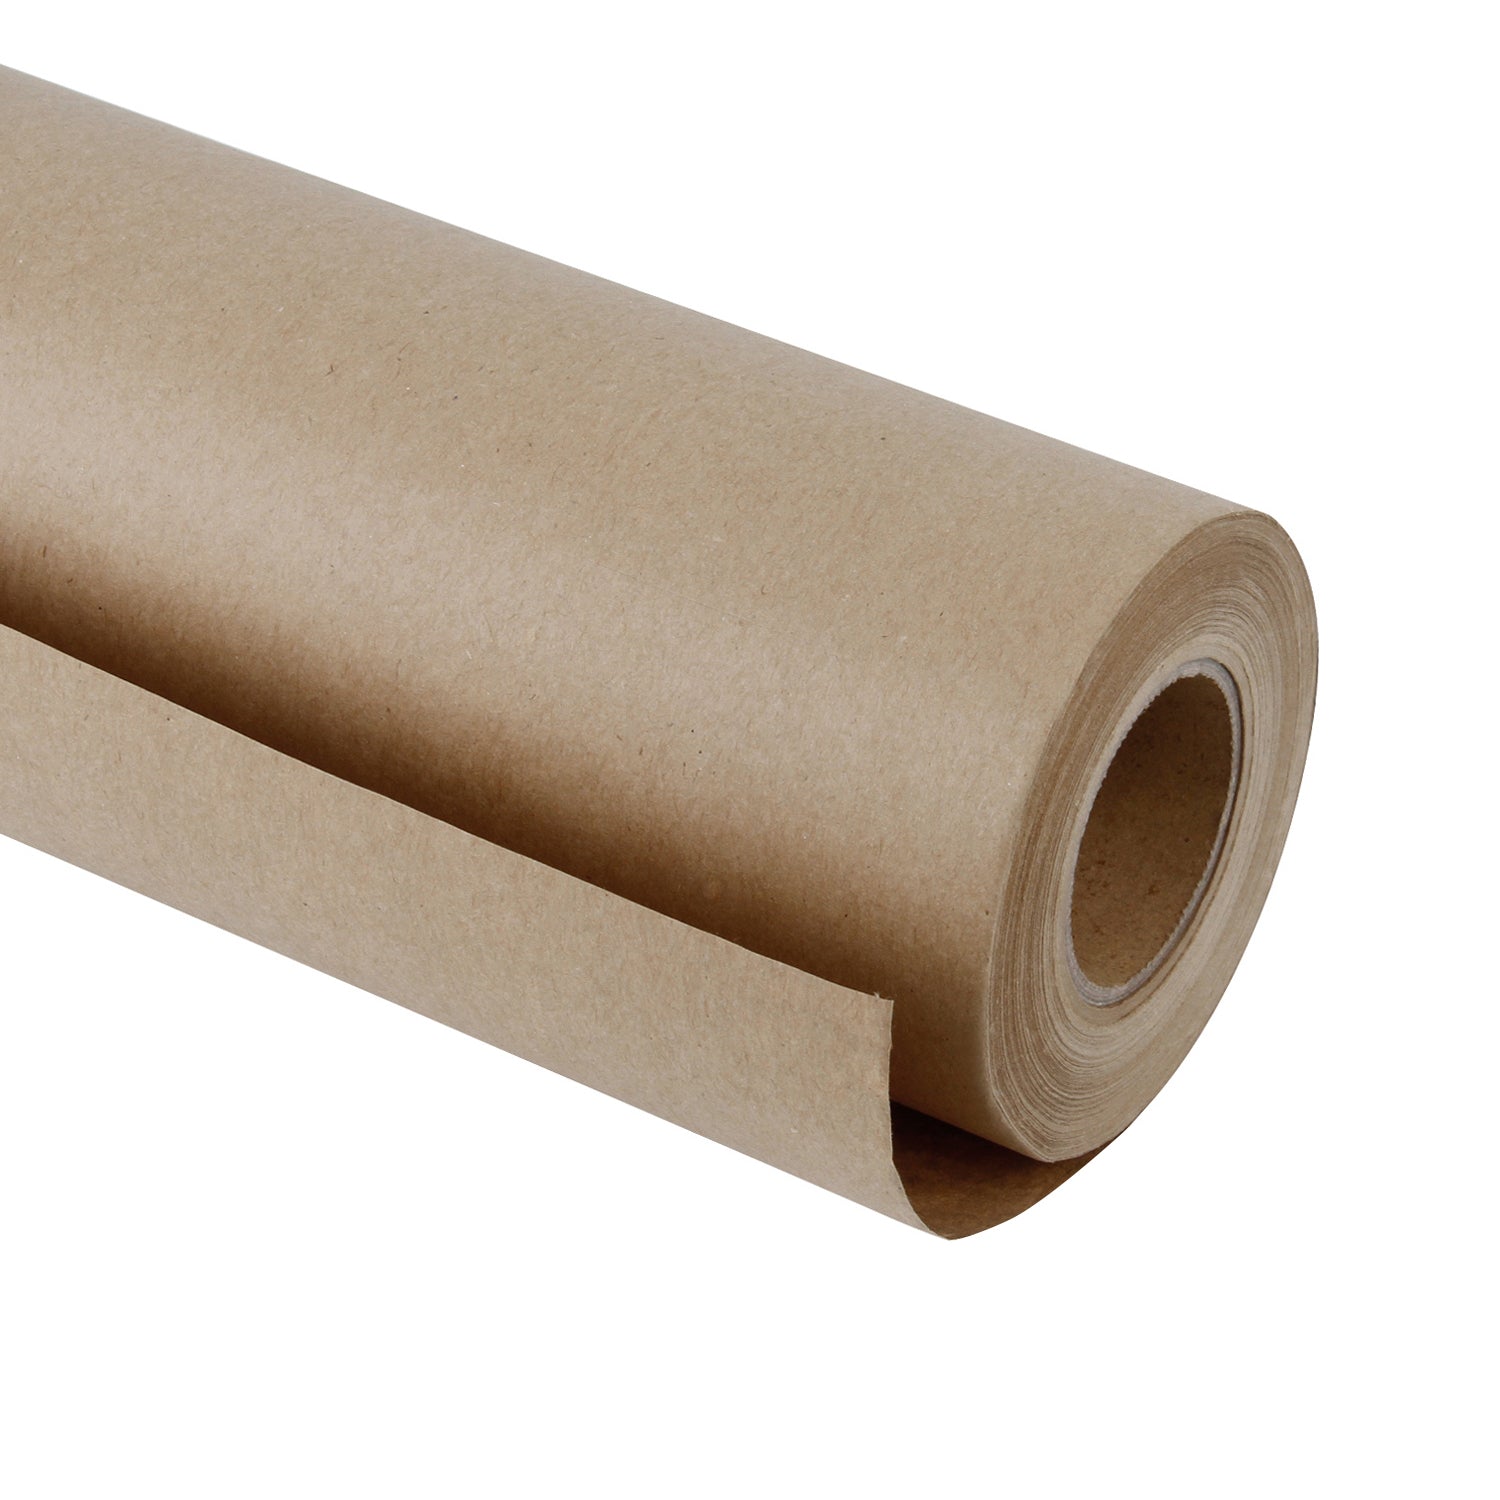 RUSPEPA White Kraft Paper Roll - 48 inch x 100 Feet - Recycled Paper Perfect for